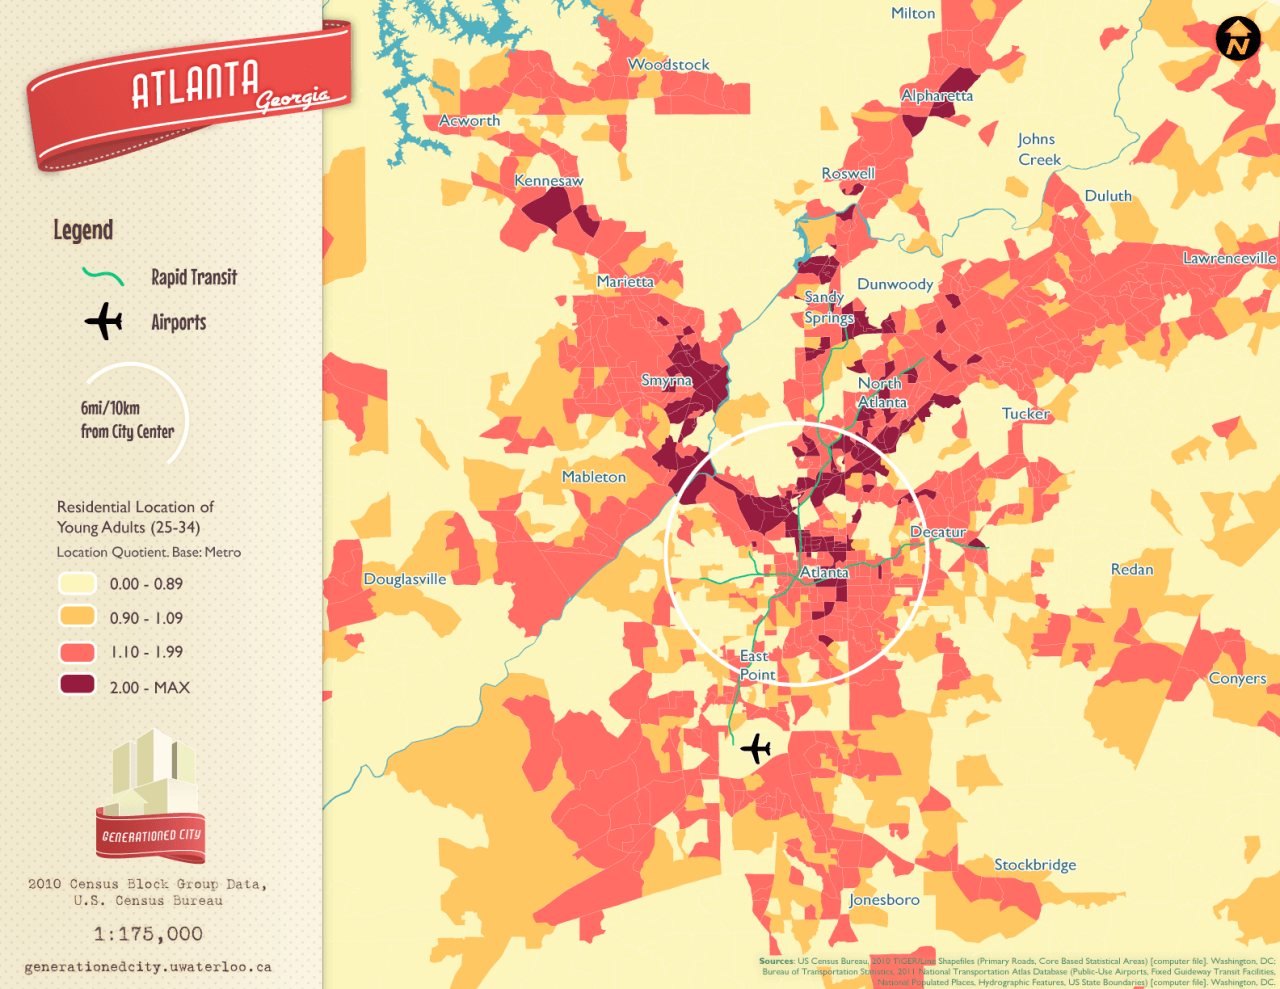 Residential location of young adults in Atlanta.